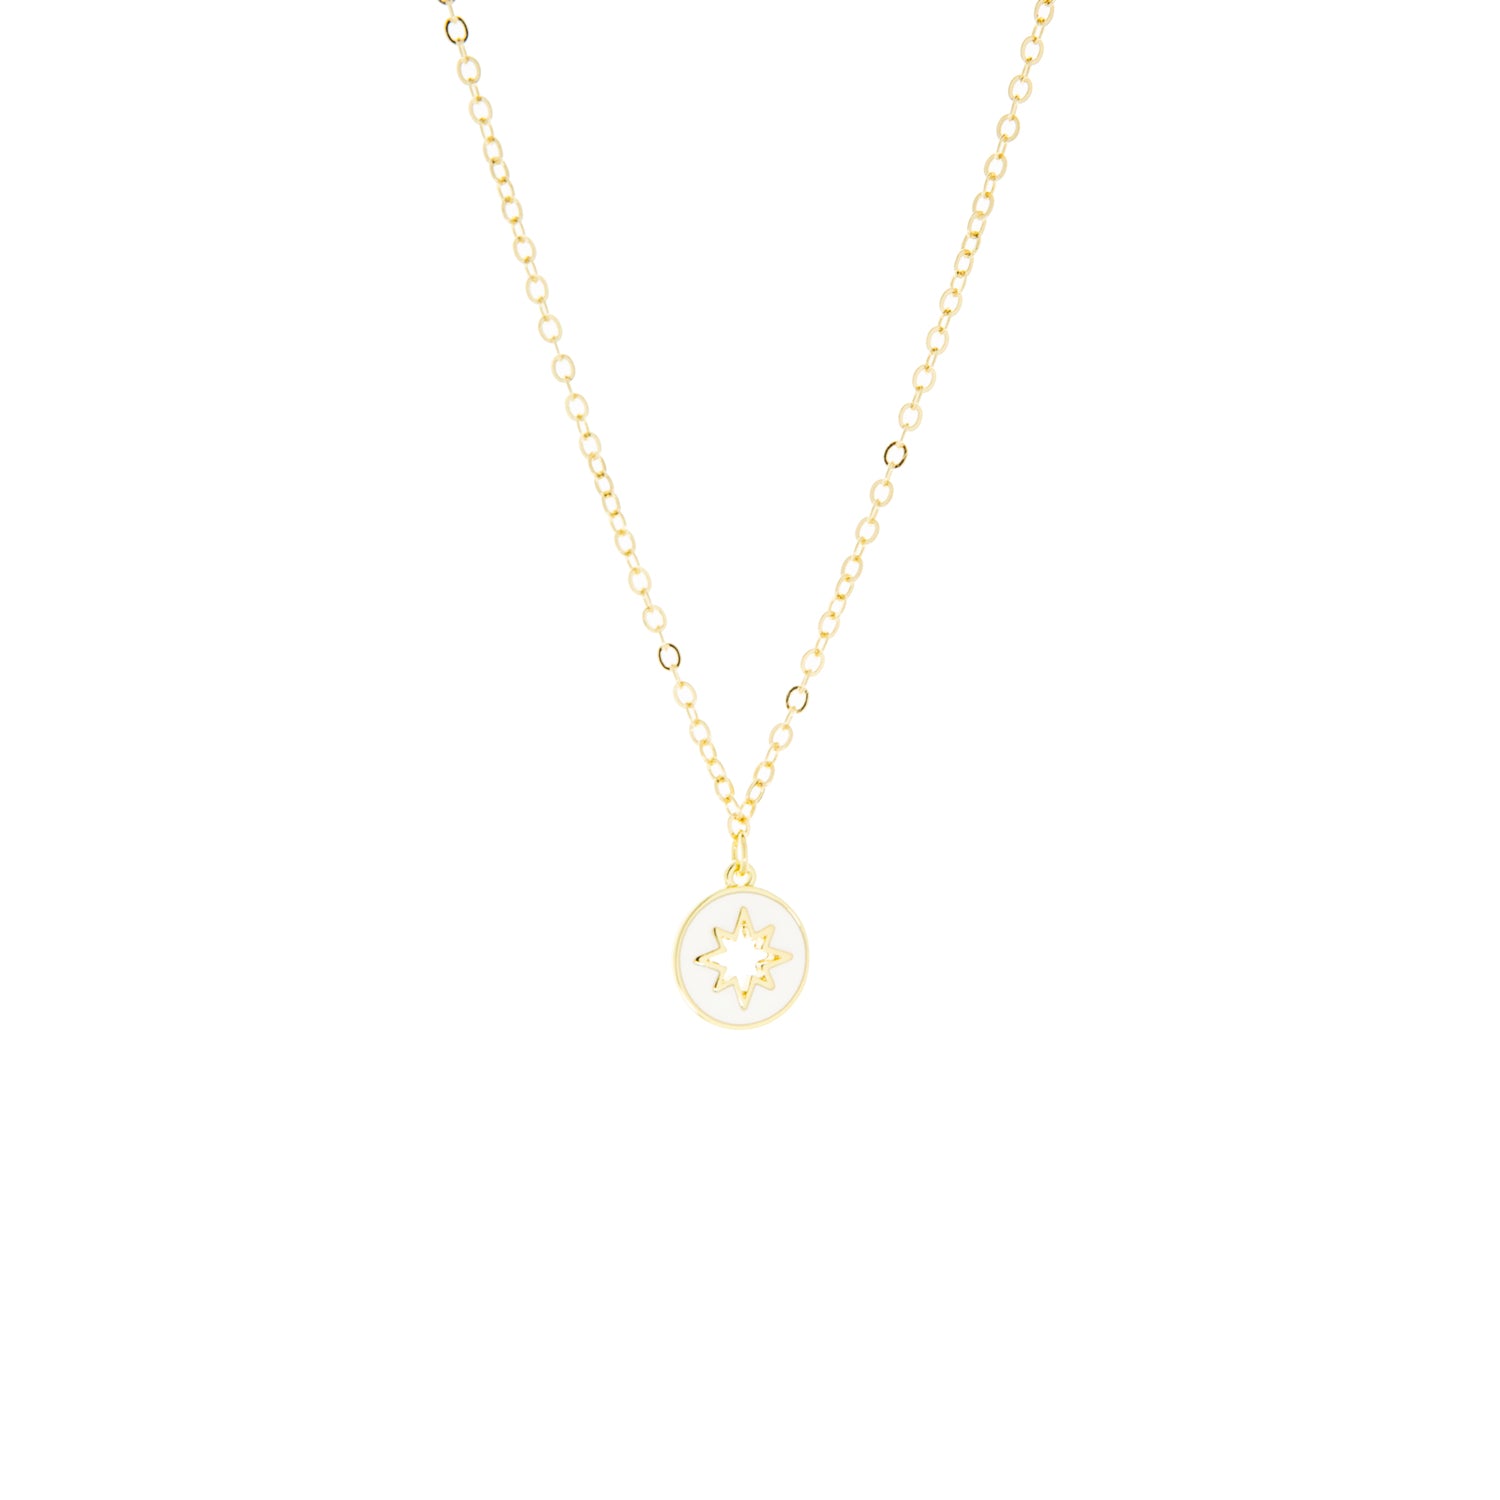 necklace with enamel starburst cutout charm